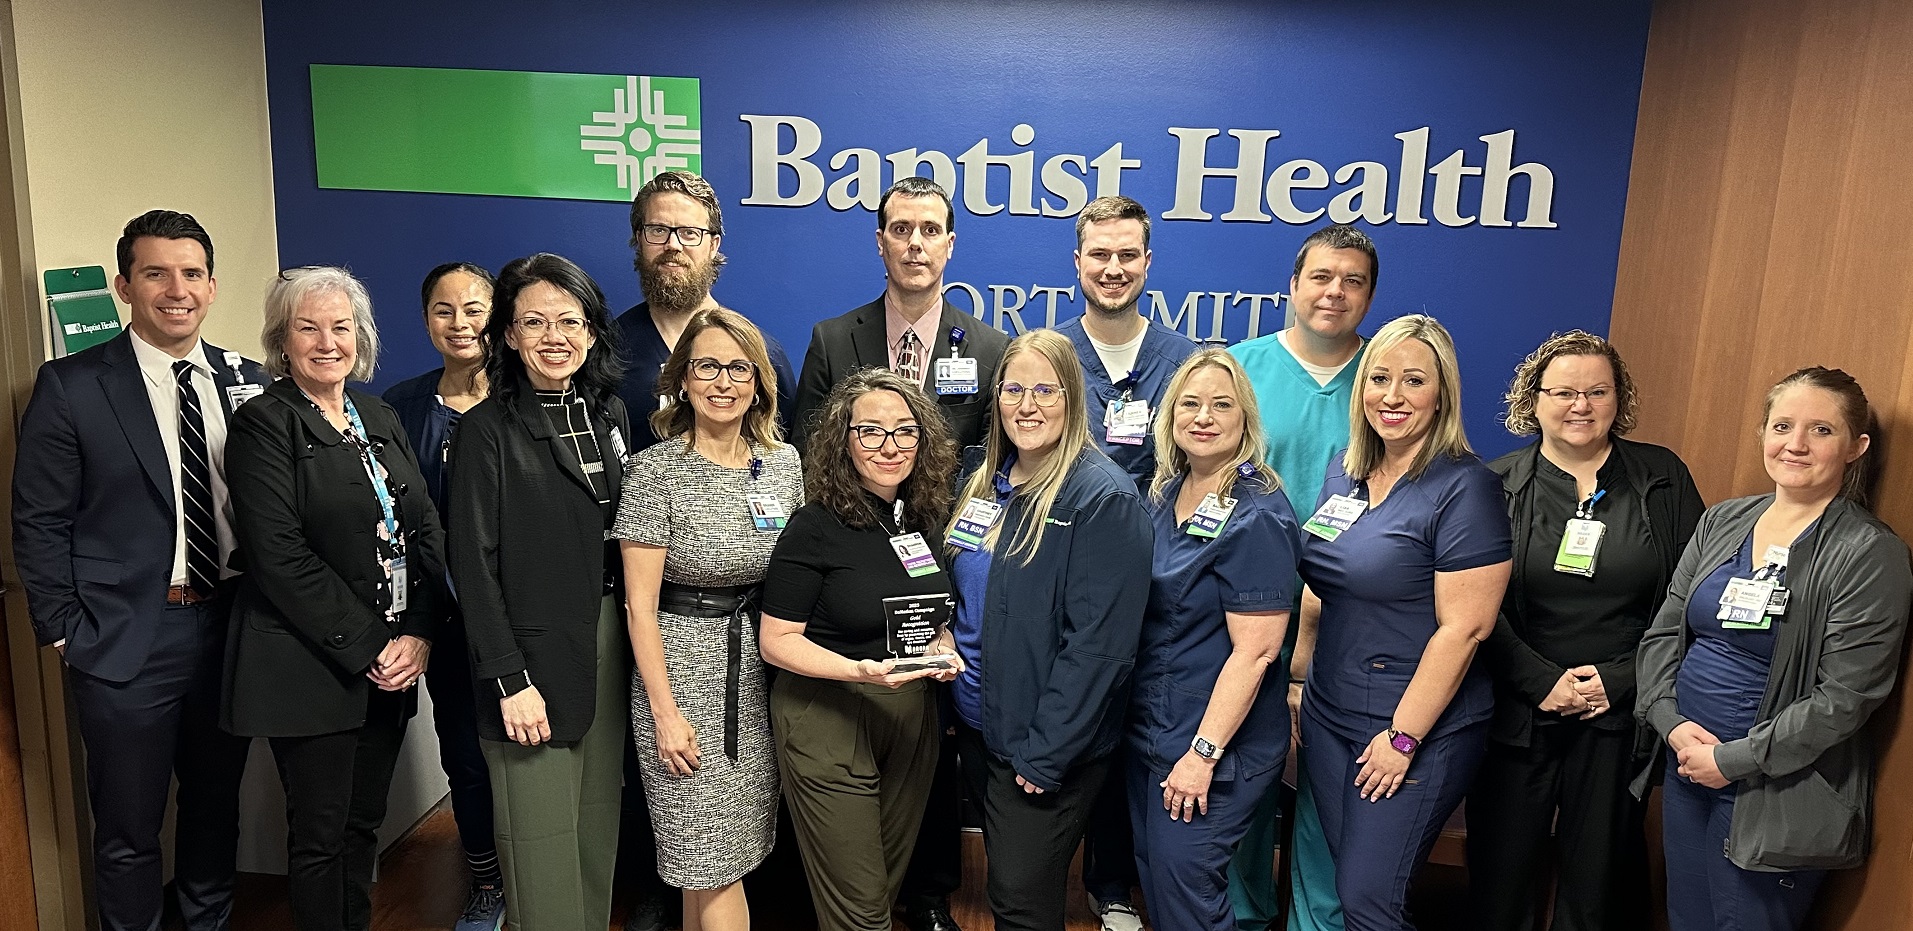 Baptist Health Medical Centers Honored for Organ Donation Efforts